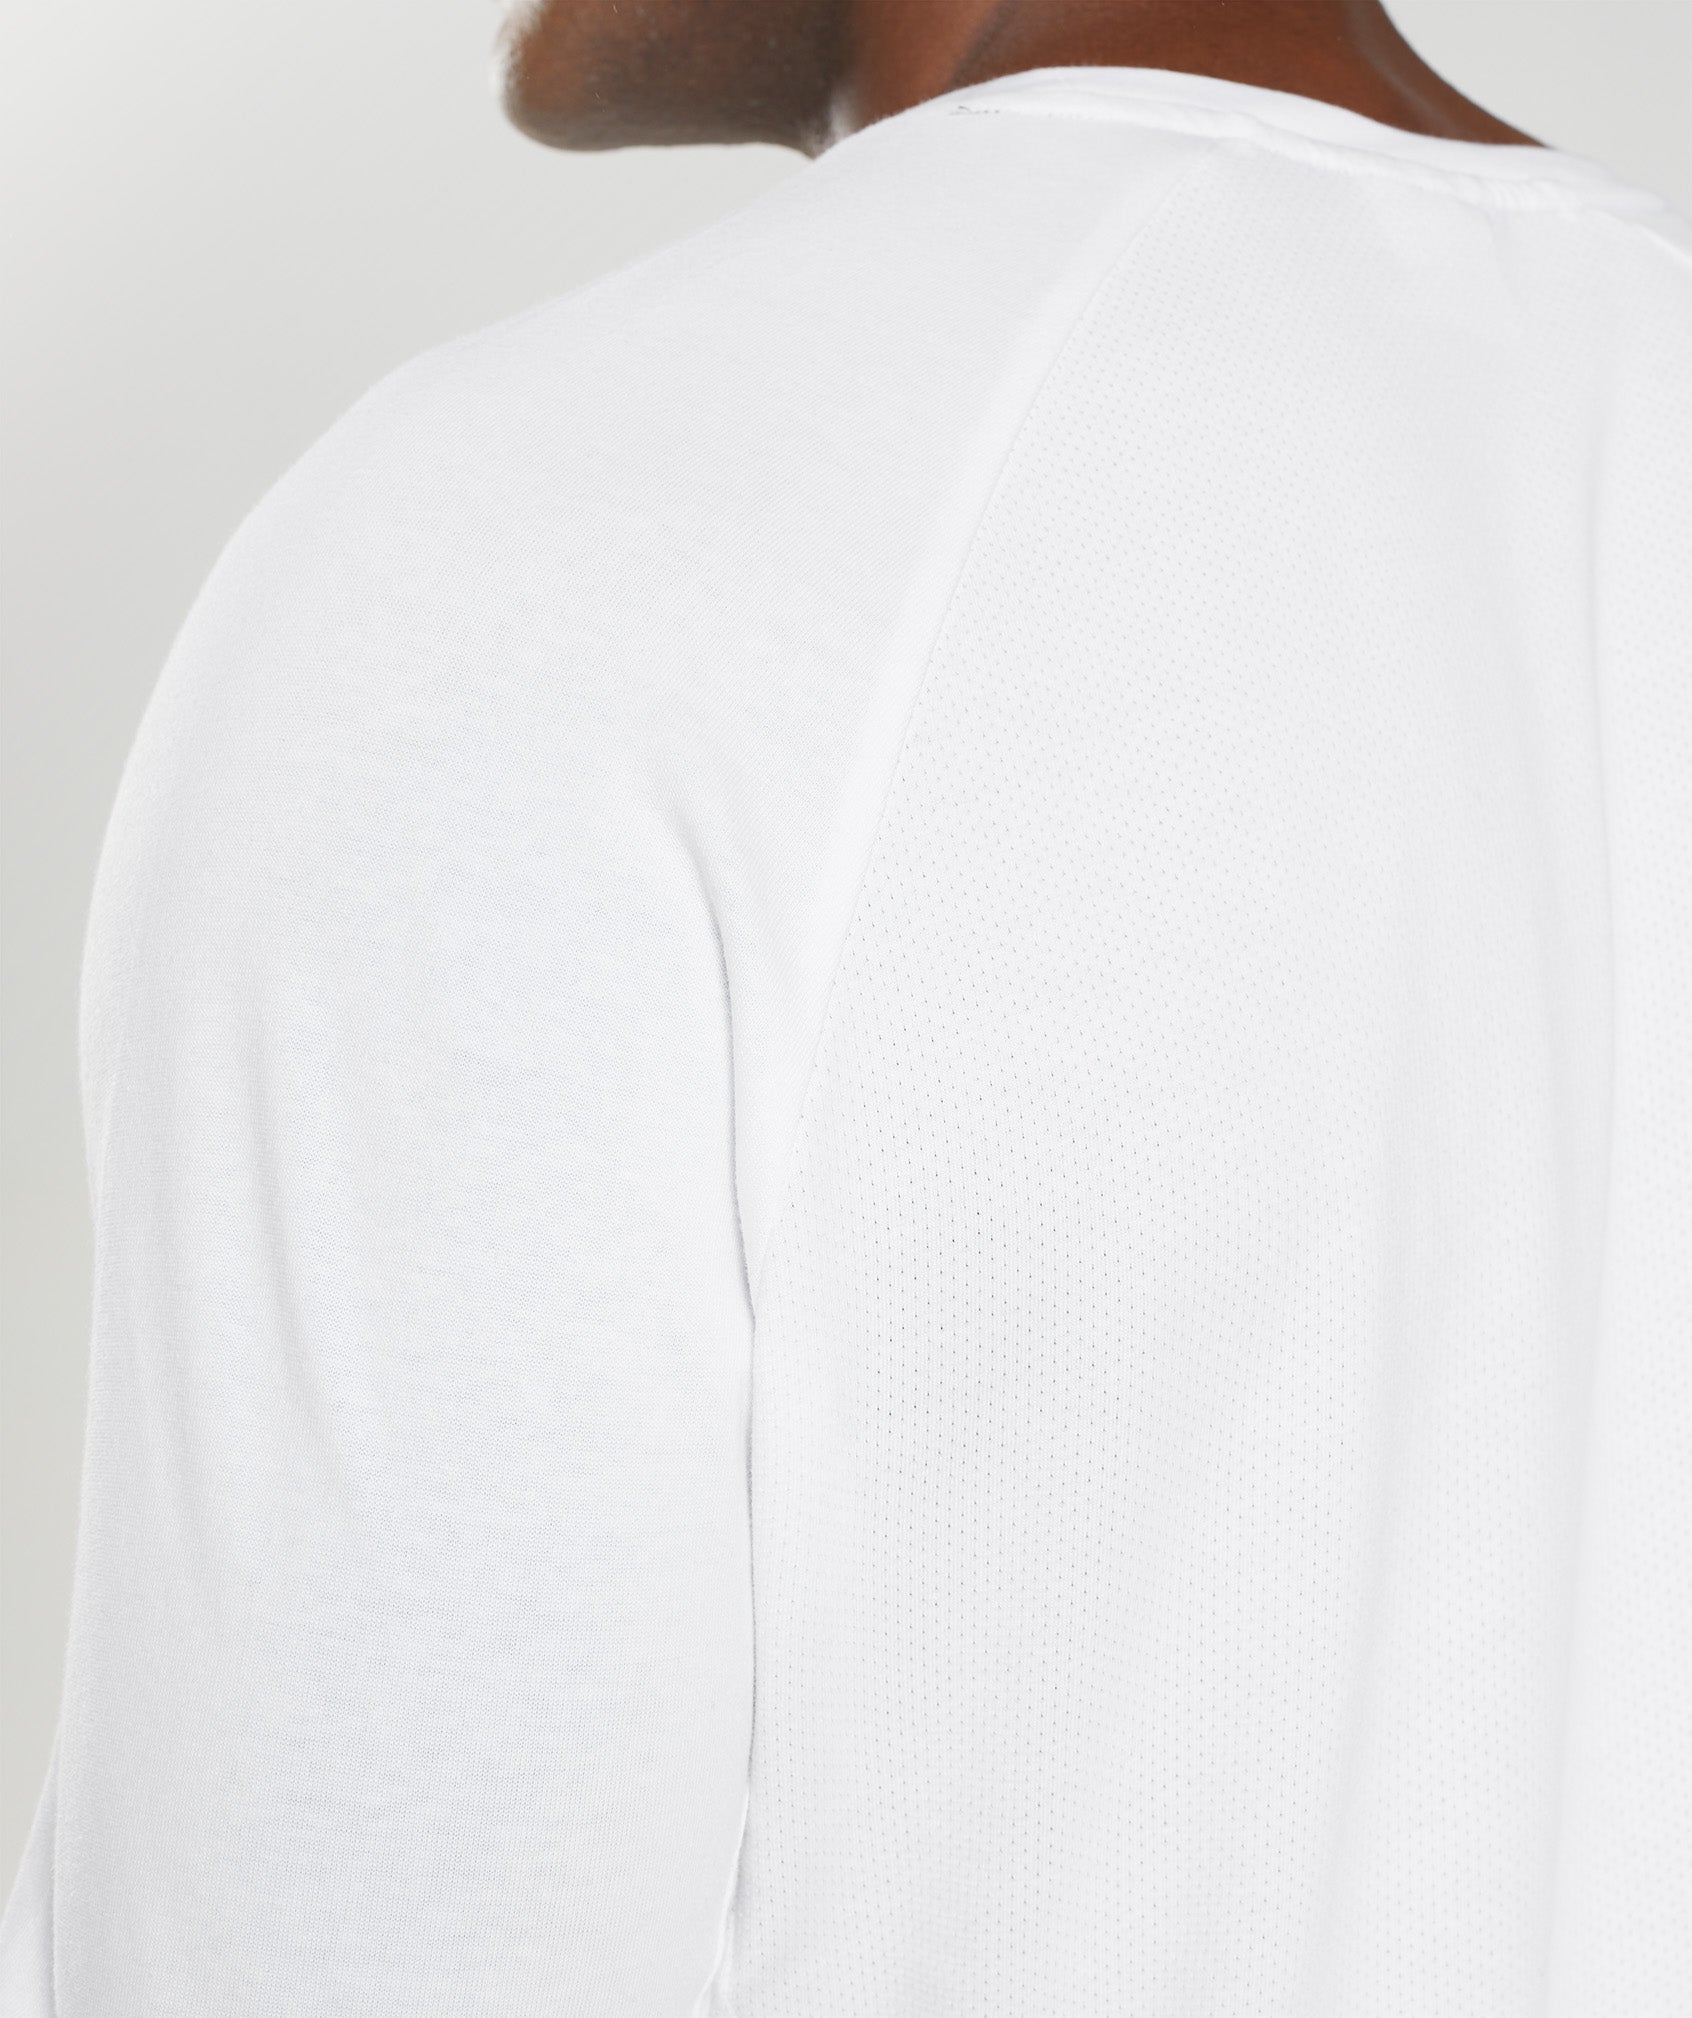 React Long Sleeve Top in White - view 6